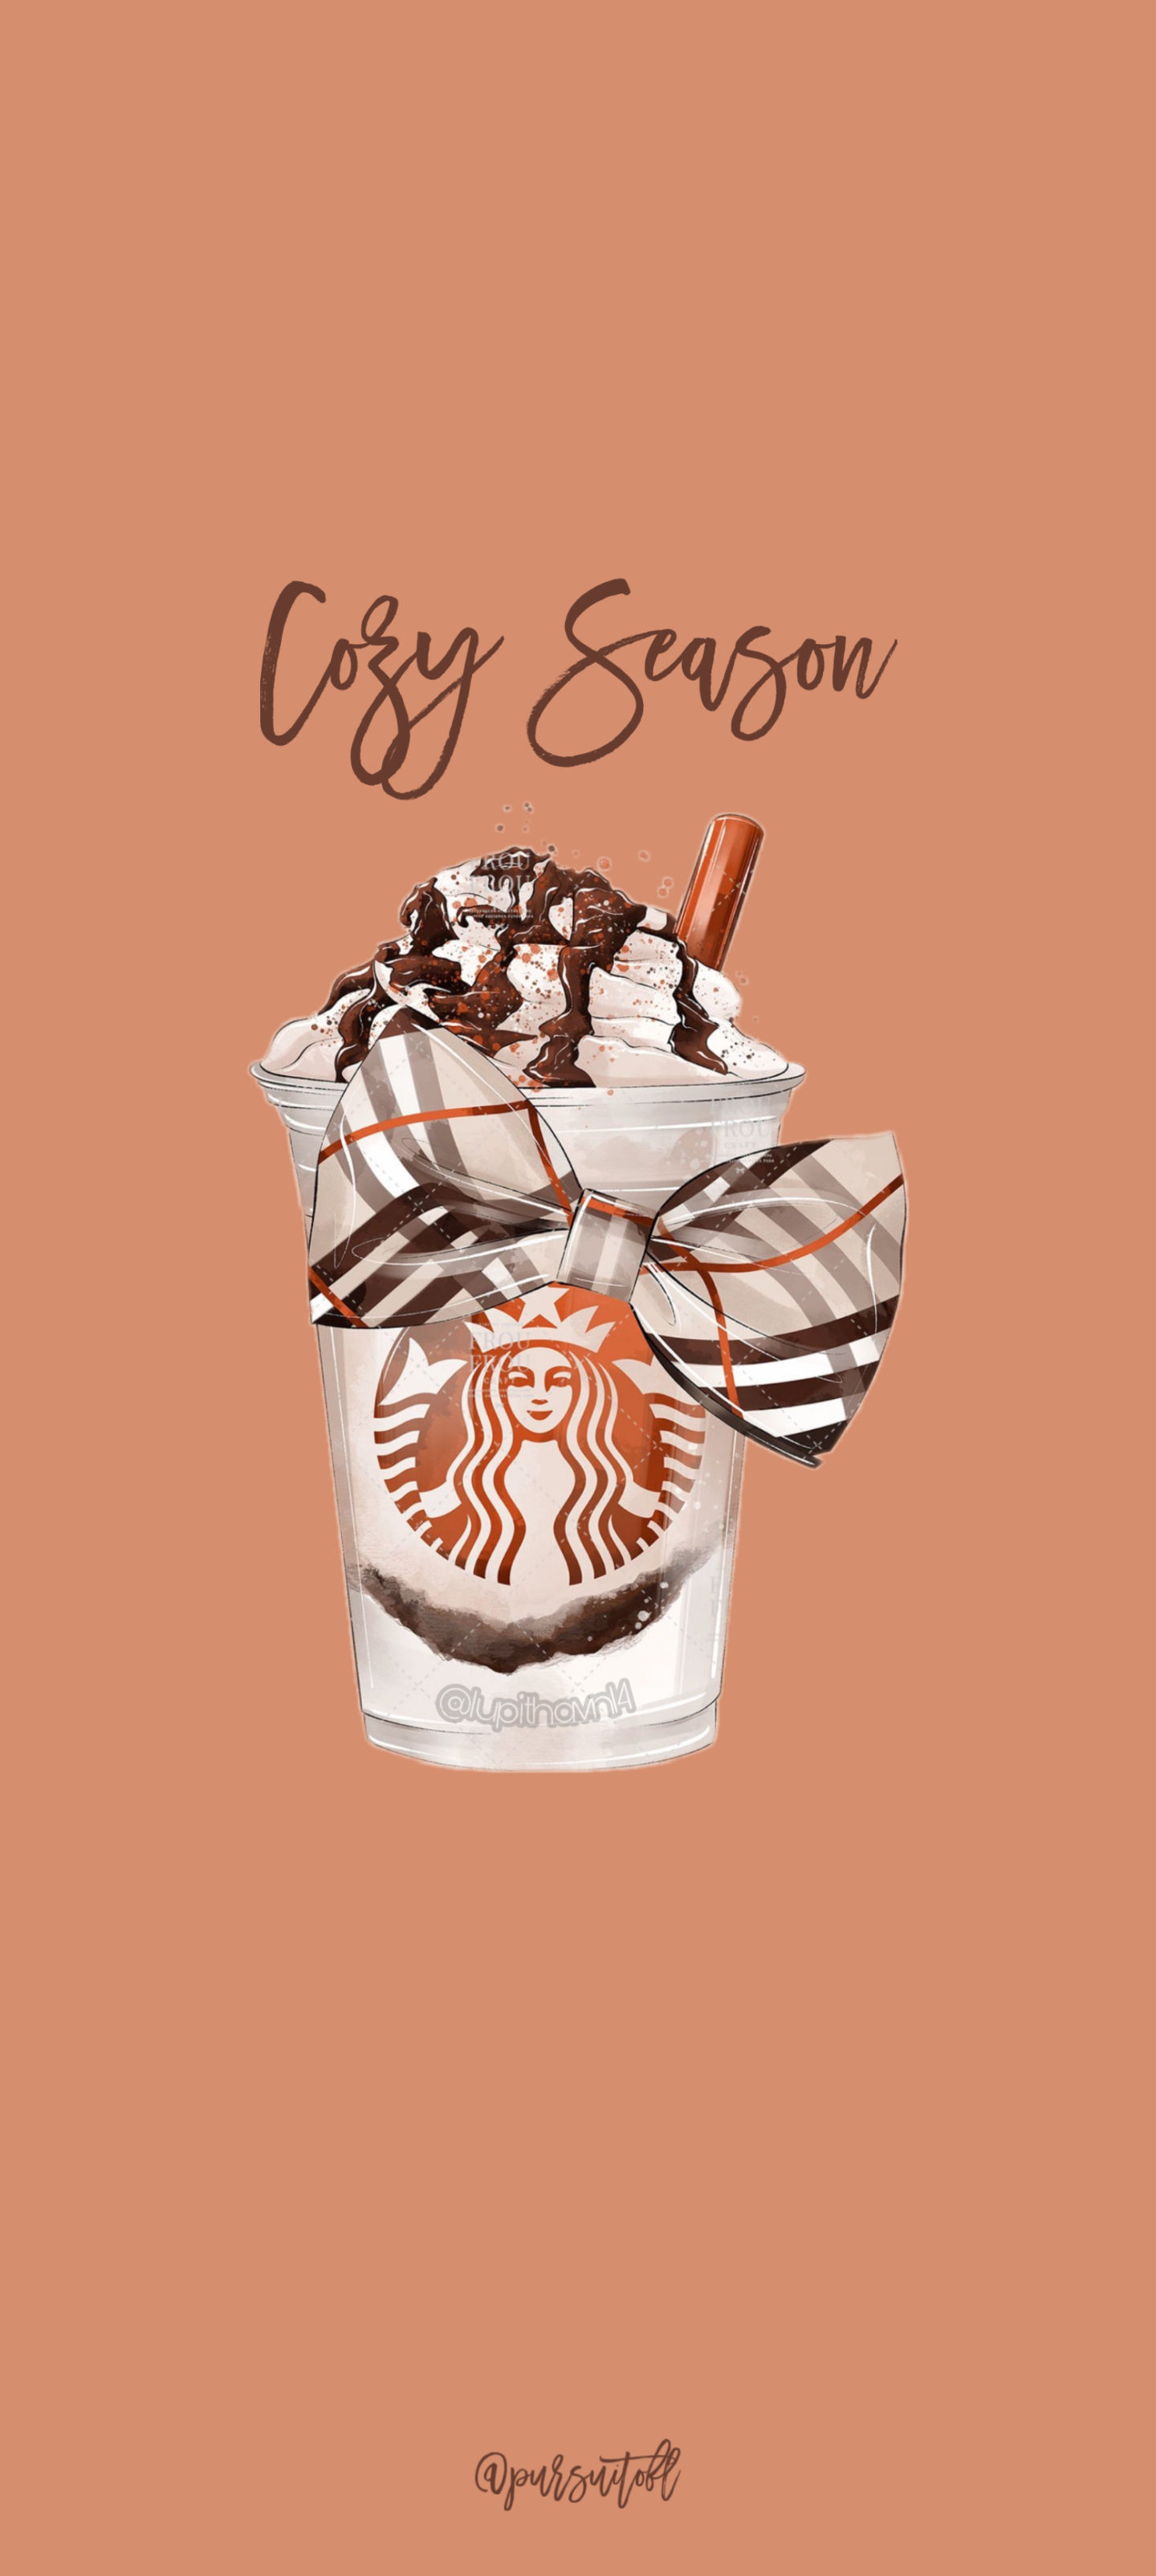 Orange fall phone wallpaper with Starbucks drink and brown plaid bow and brown cozy season text